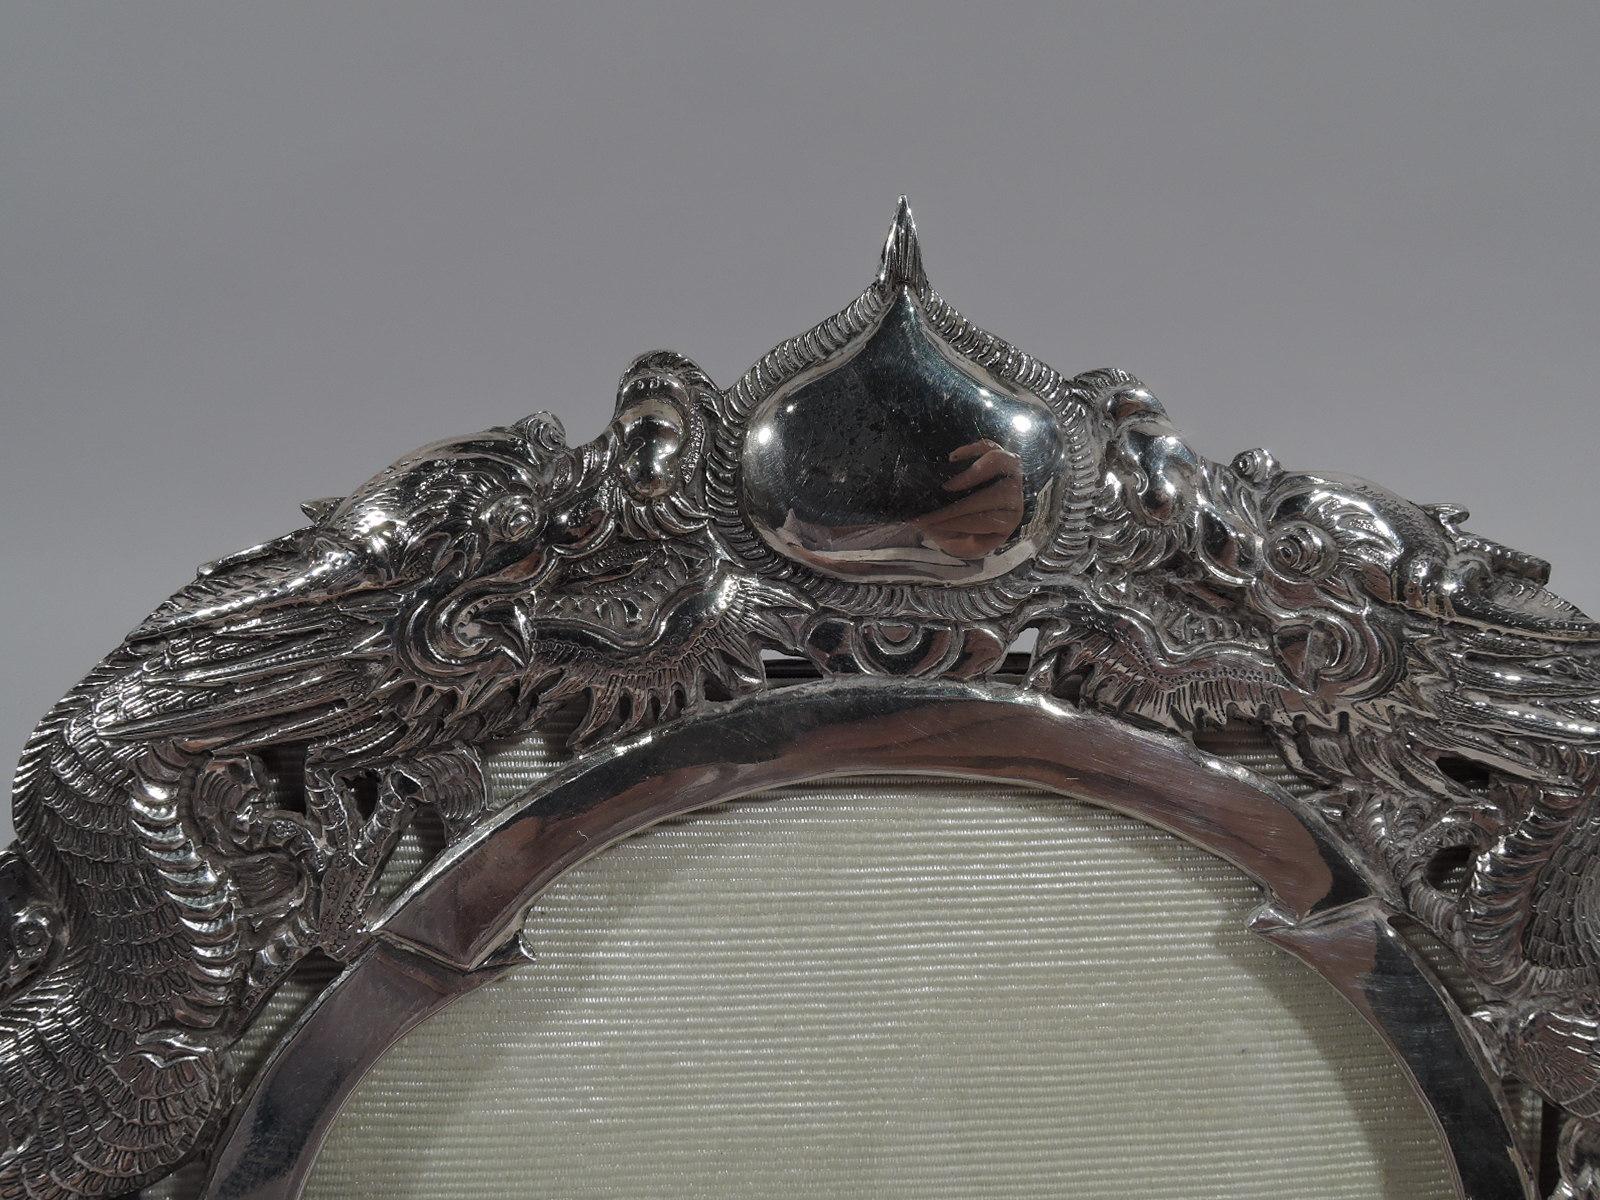 Turn-of-the-century Chinese export silver frame. Oval window in chased and embossed horseshoe surround: A scaly, serpentine dragon on each side and winged horses at bottom. A dramatic showcase for a formidable matriarch. Marked. 

Dimensions: